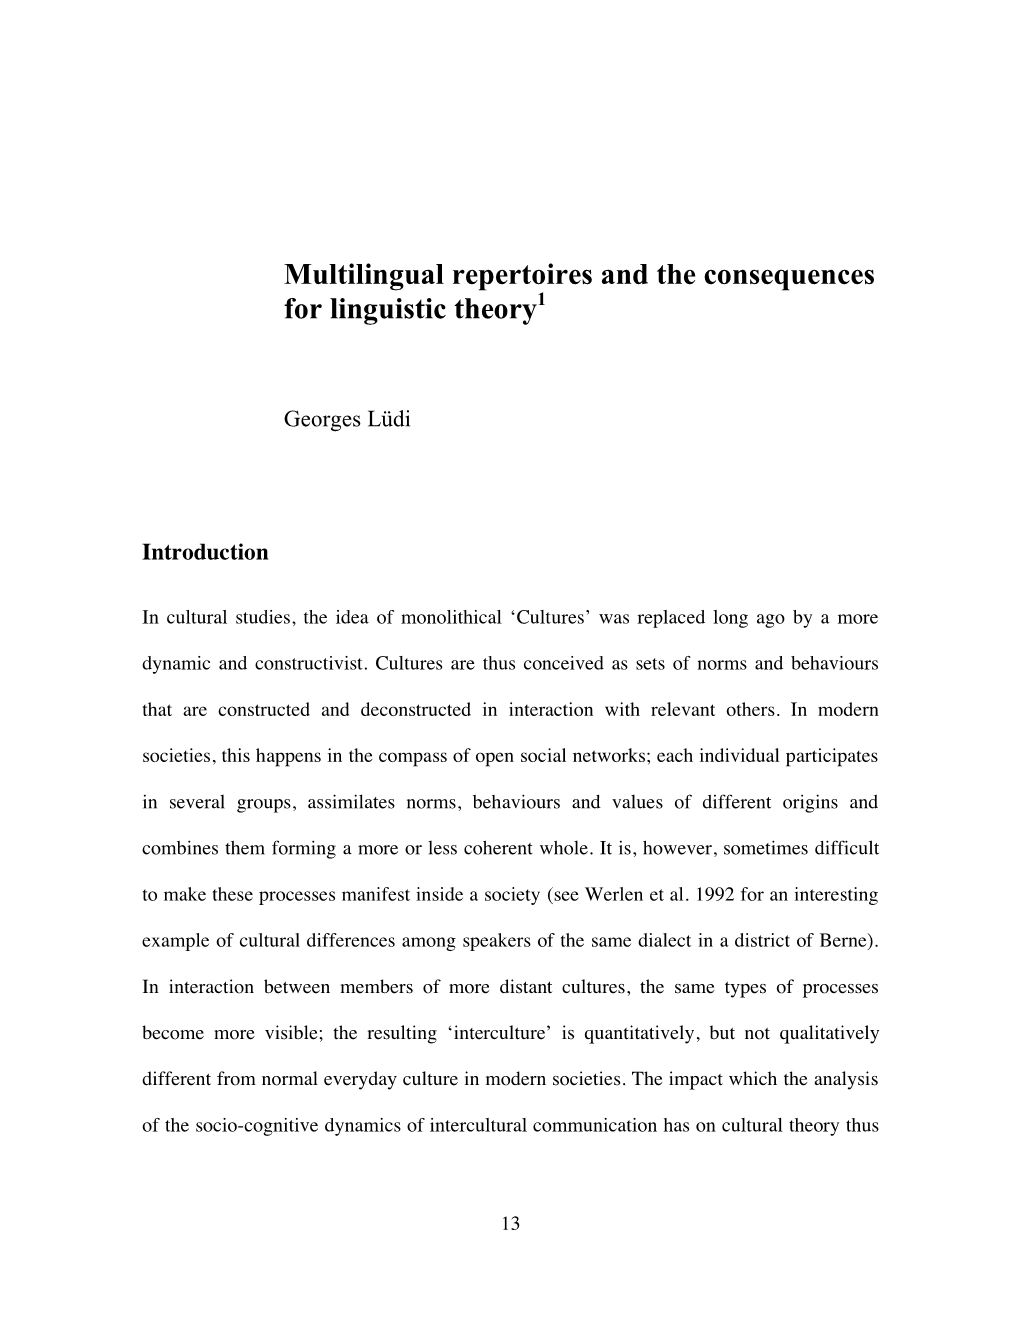 Multilingual Repertoires and the Consequences for Linguistic Theory1